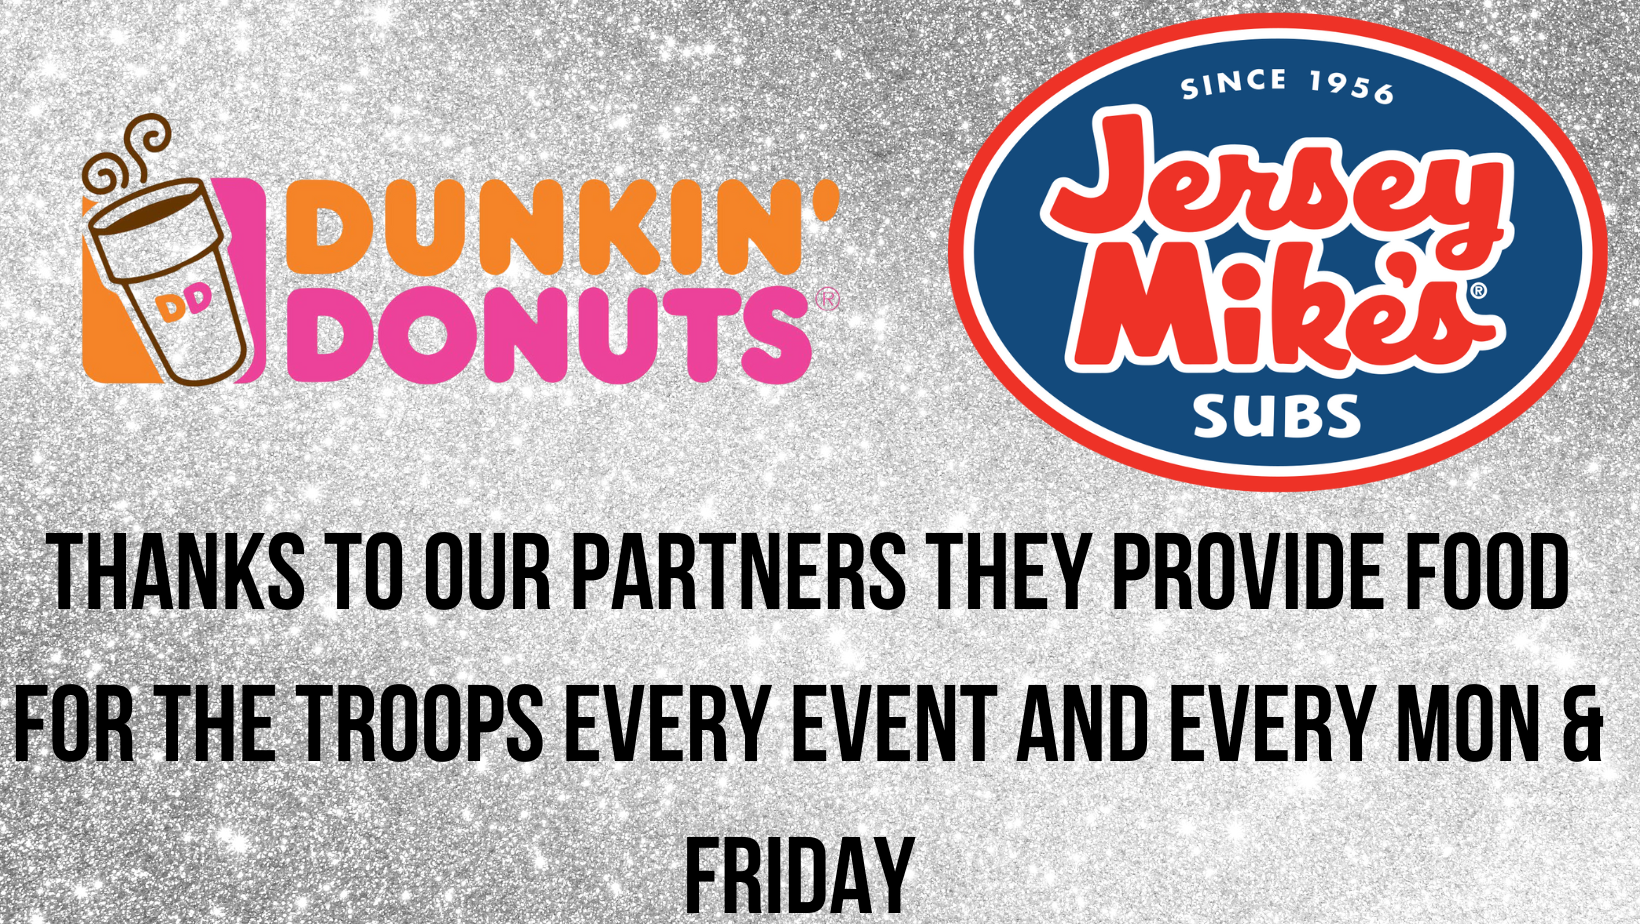 Dunkin’ Donuts & Jersey Mike’s